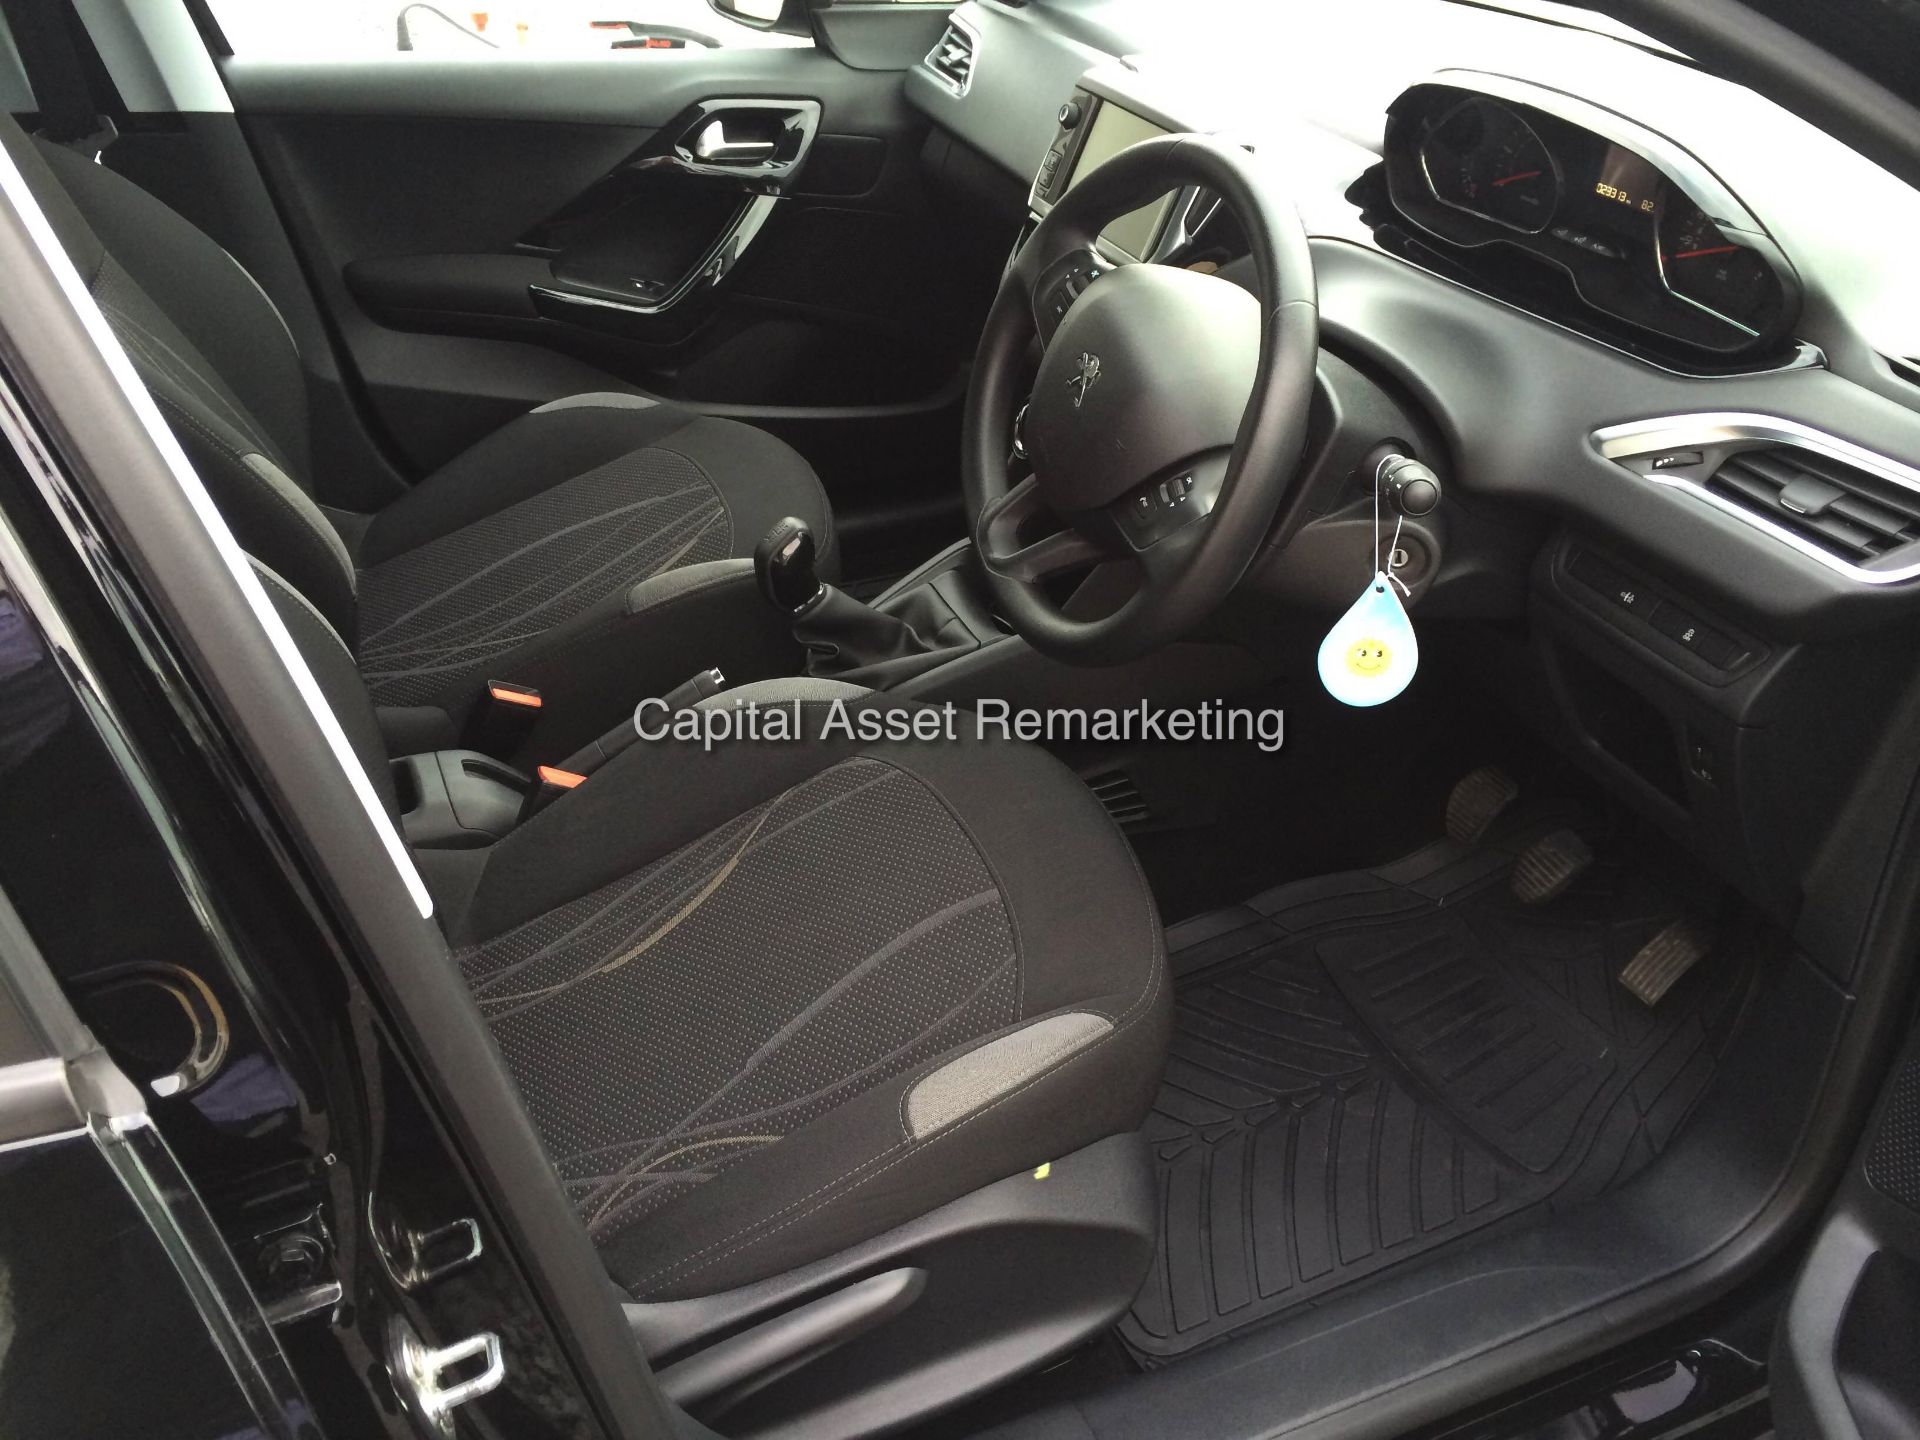 PEUGEOT 208 1.4 HDI 'ACTIVE' 5 DOOR (2014 - 14 REG)  **OWNED BY PEUGEOT FROM NEW** - Image 7 of 15